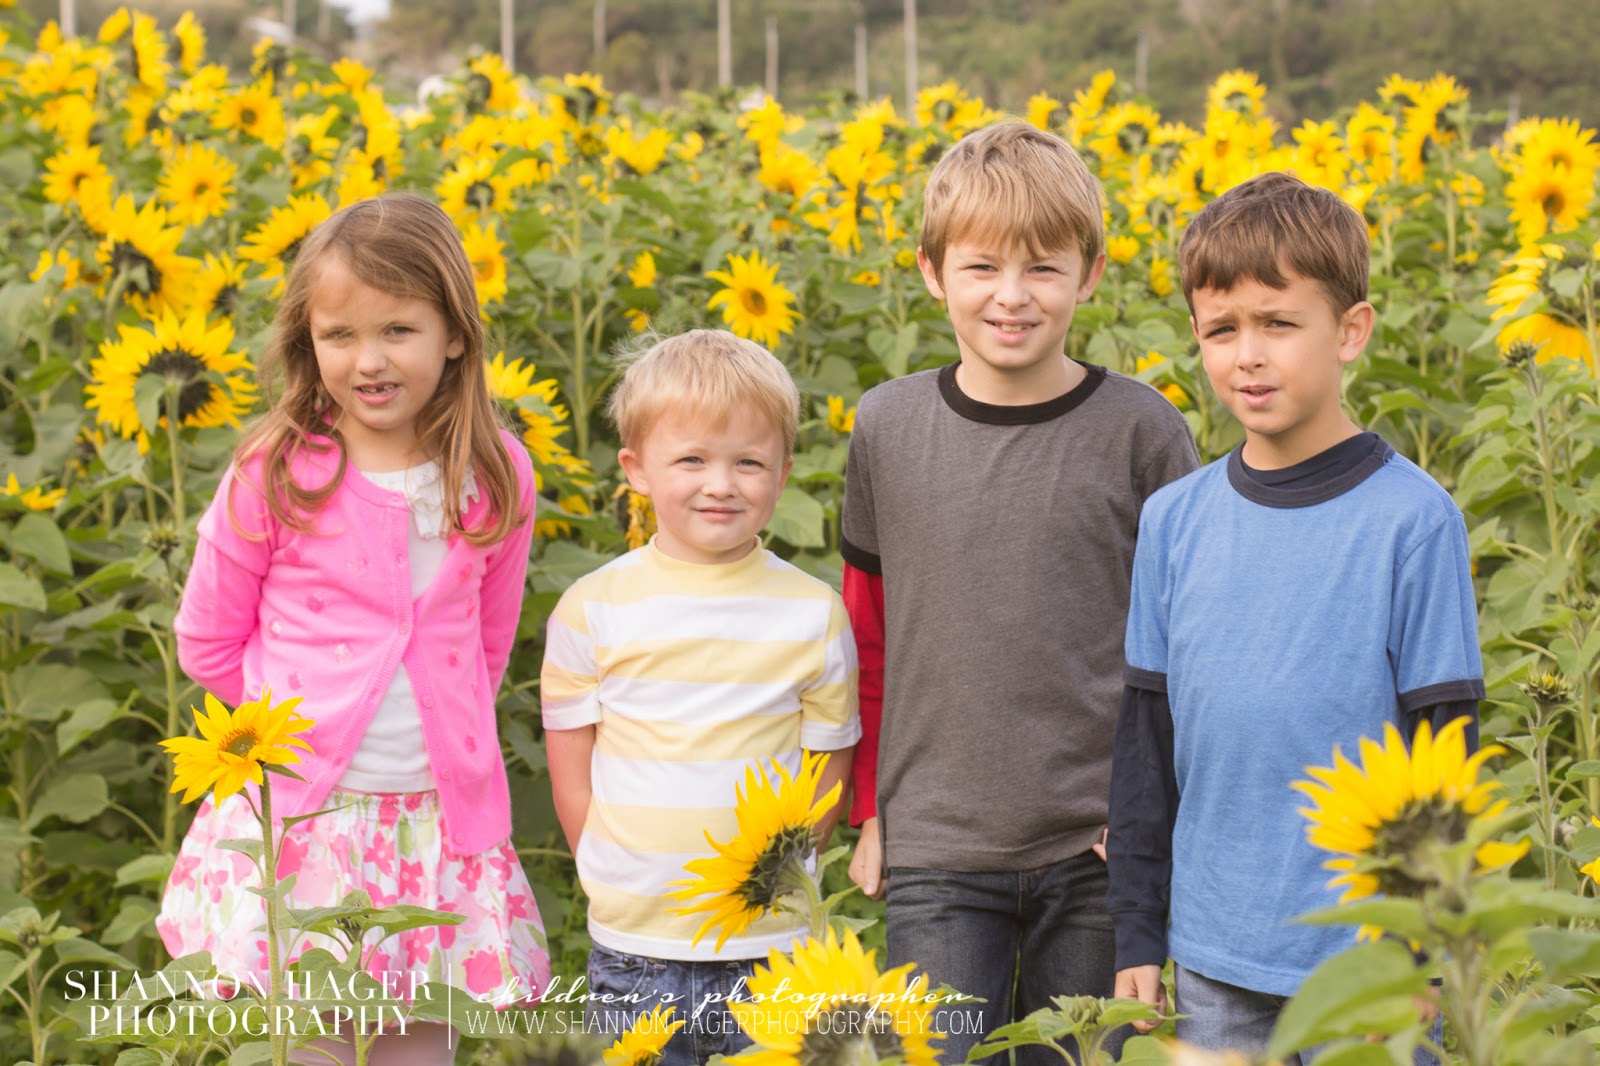 Sunflowers in Okinawa by Shannon Hager Photography, Portland Photographer